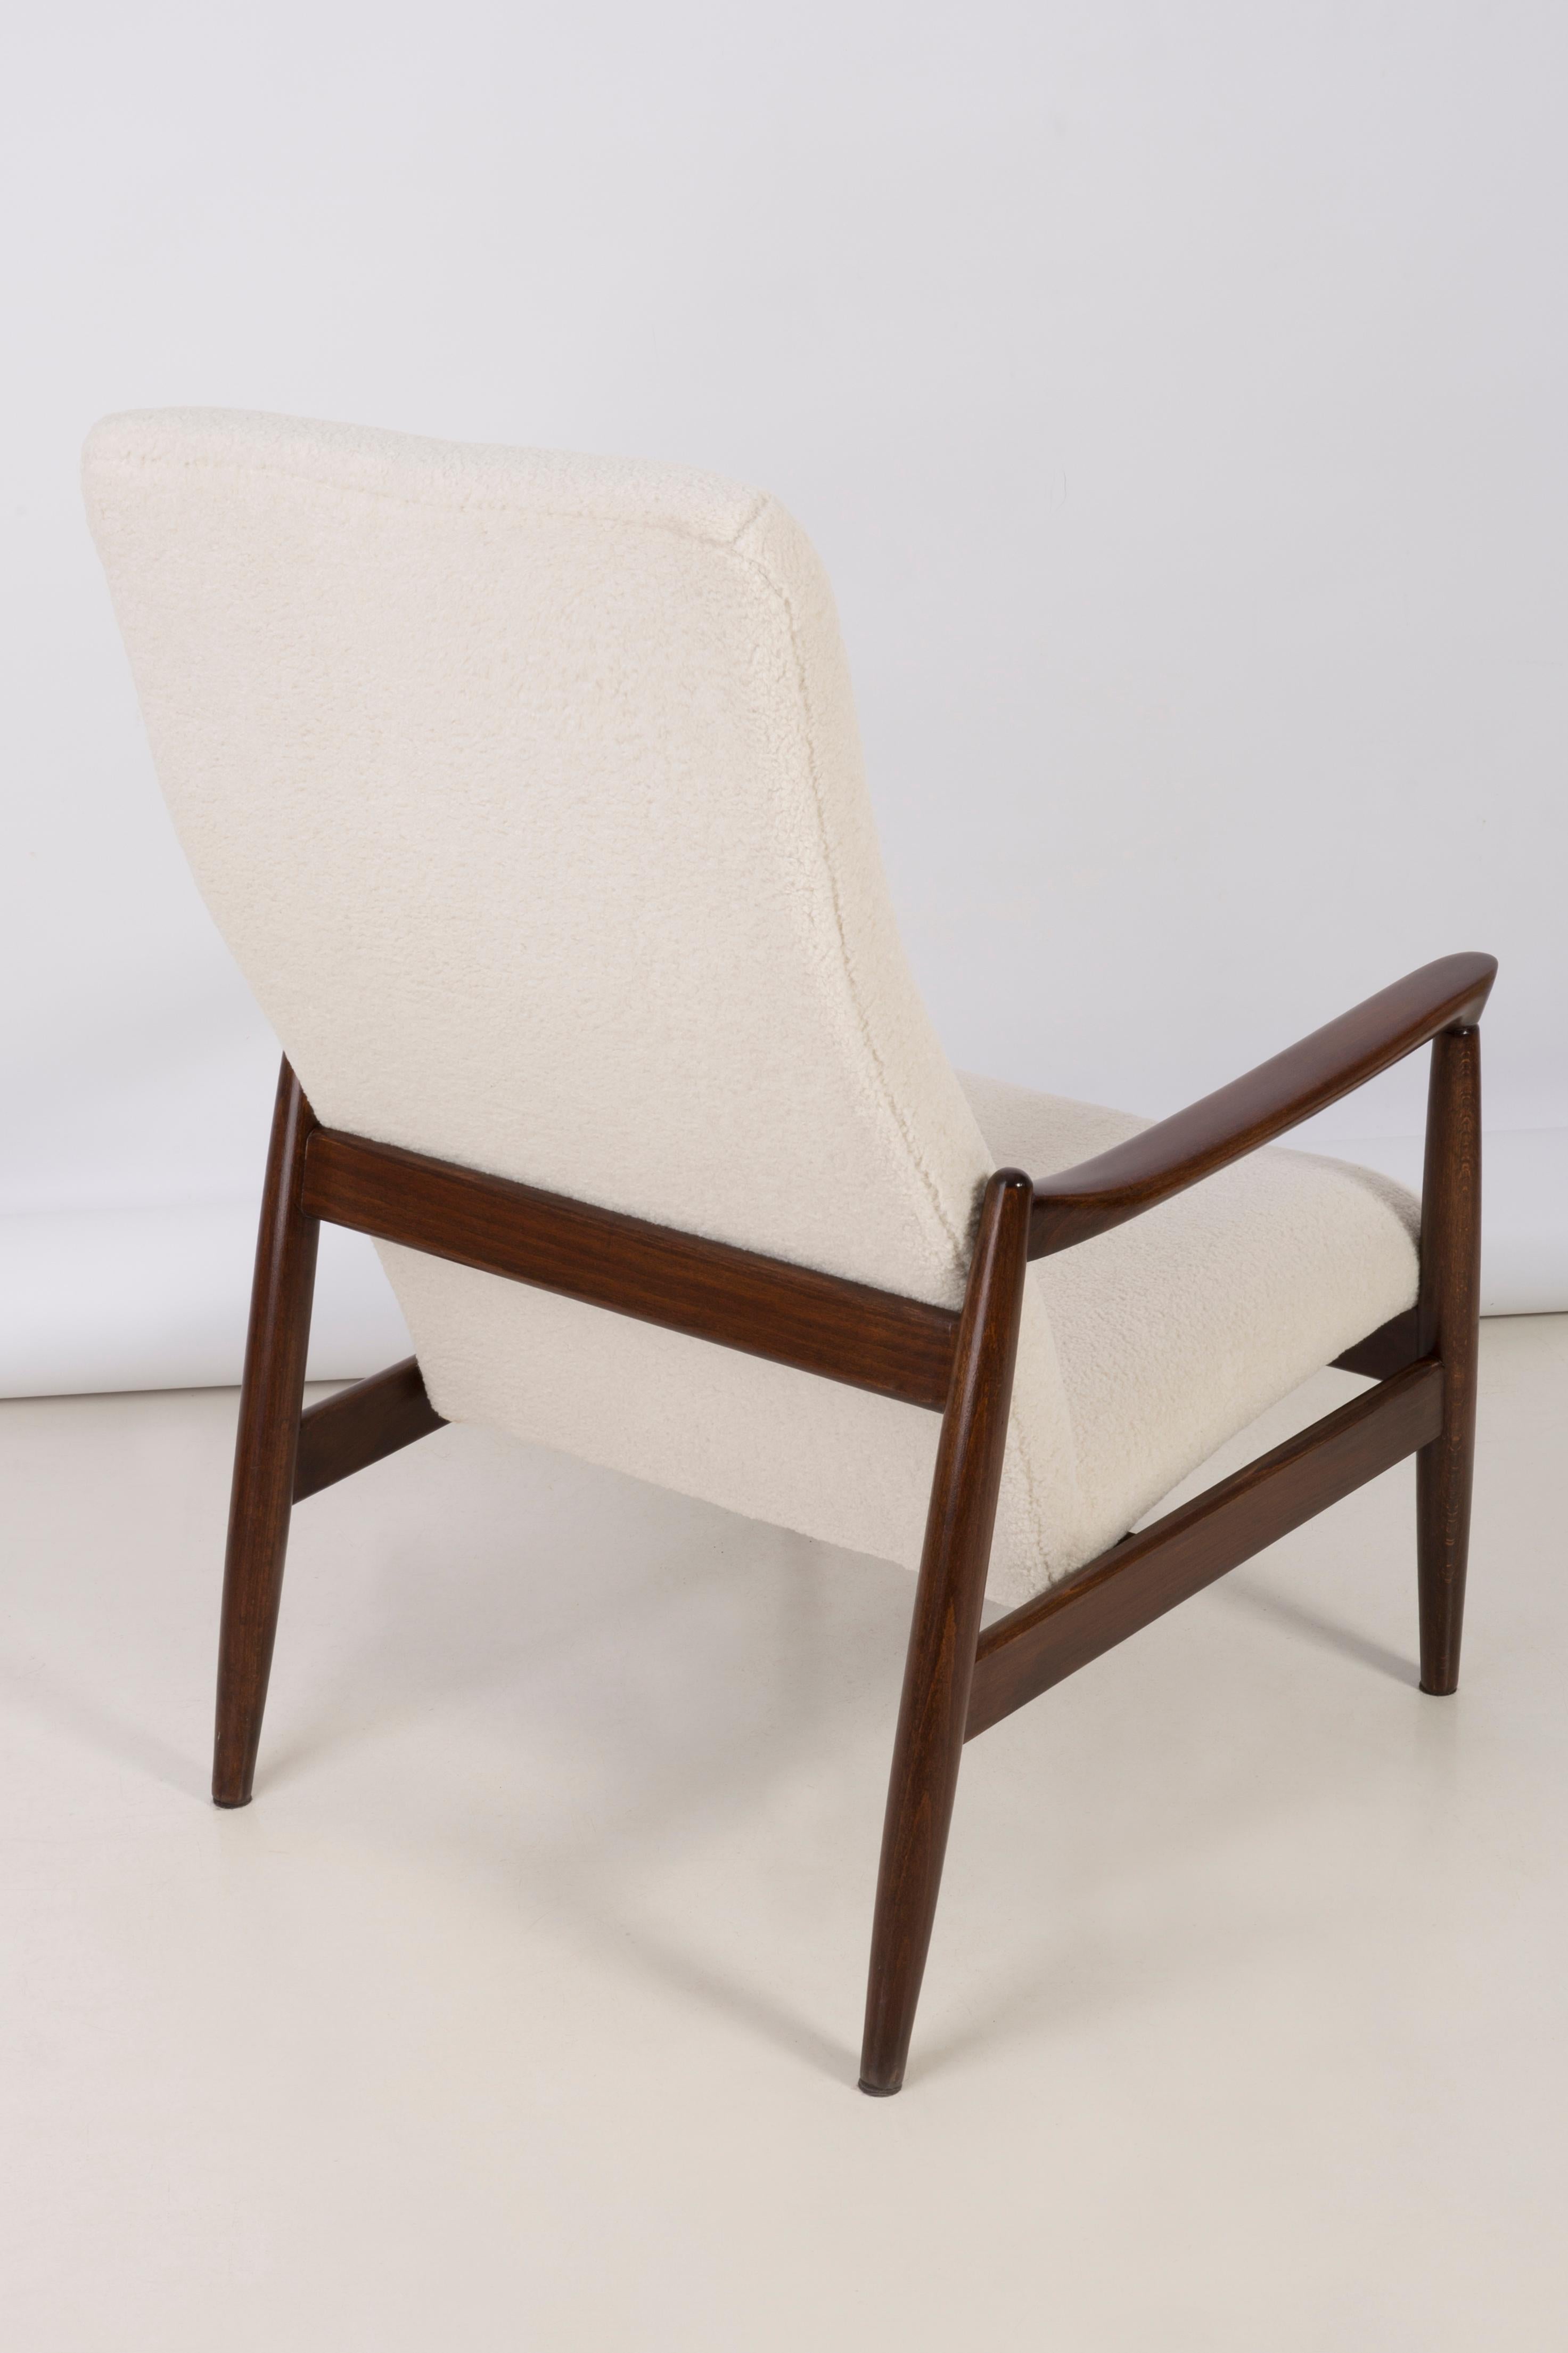 20th Century Crème Boucle Armchair and Stool, Edmund Homa, 1960s In Excellent Condition For Sale In 05-080 Hornowek, PL